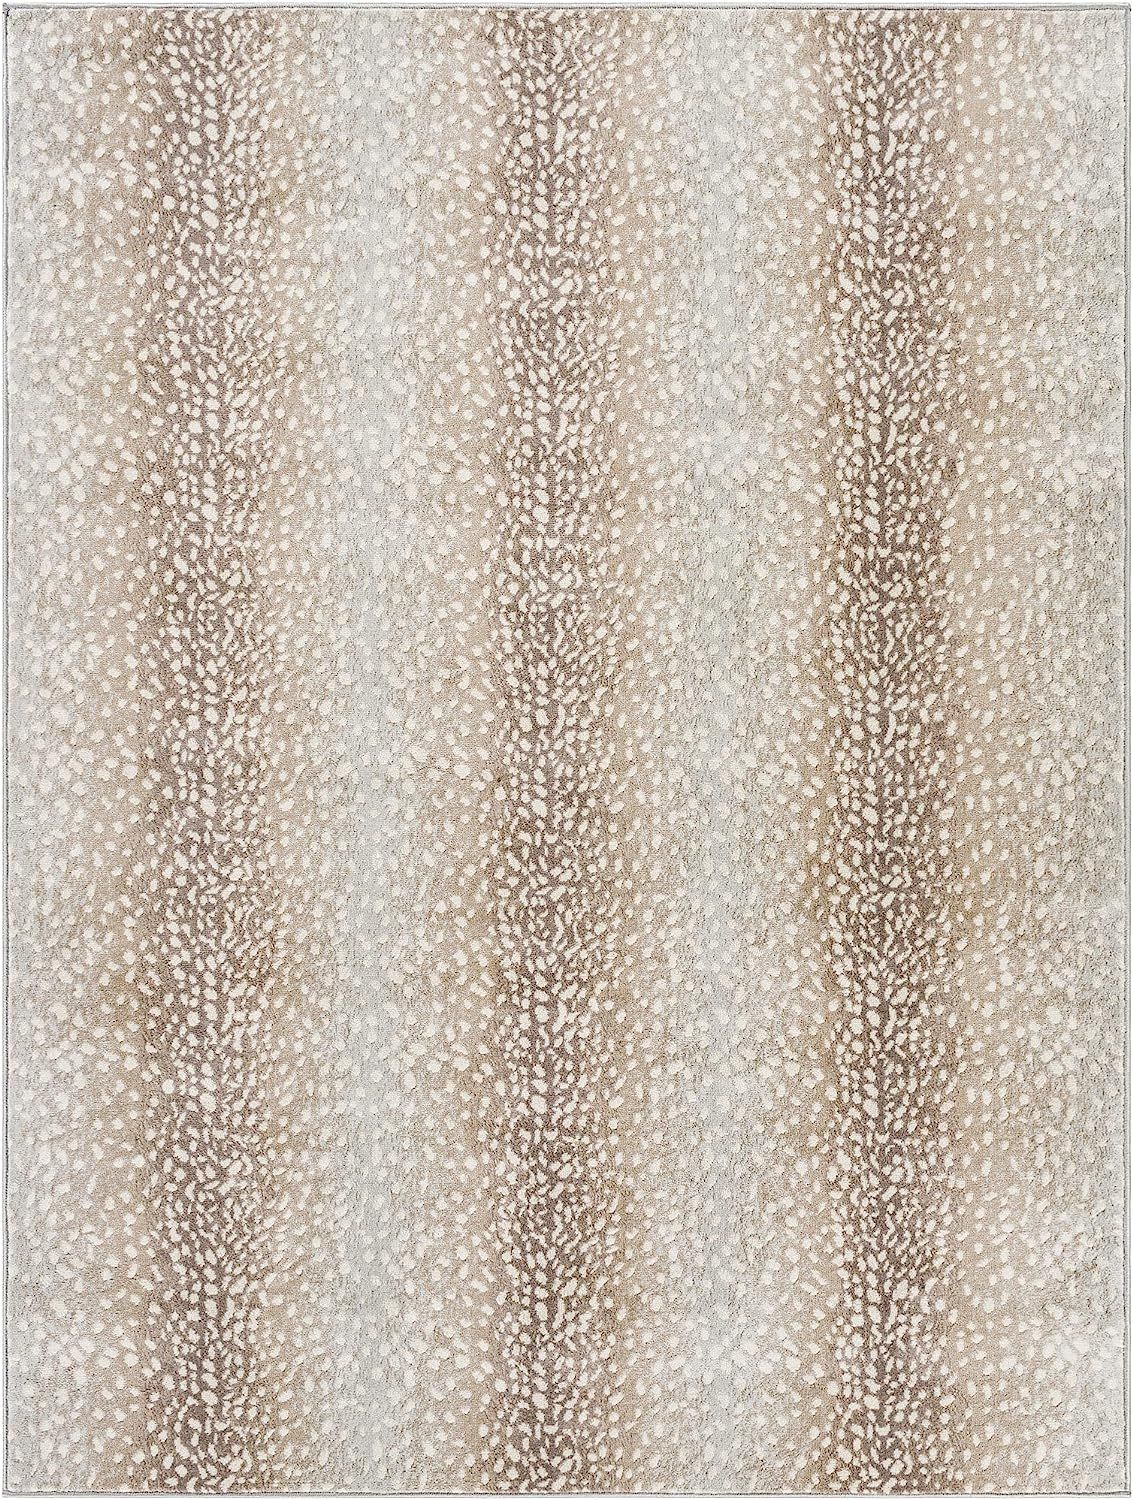 Artistic Weavers Pablo Antelope Print Area Rug, 5 ft 3 in x 7 ft 1 in, Camel/Light Gray | Amazon (US)